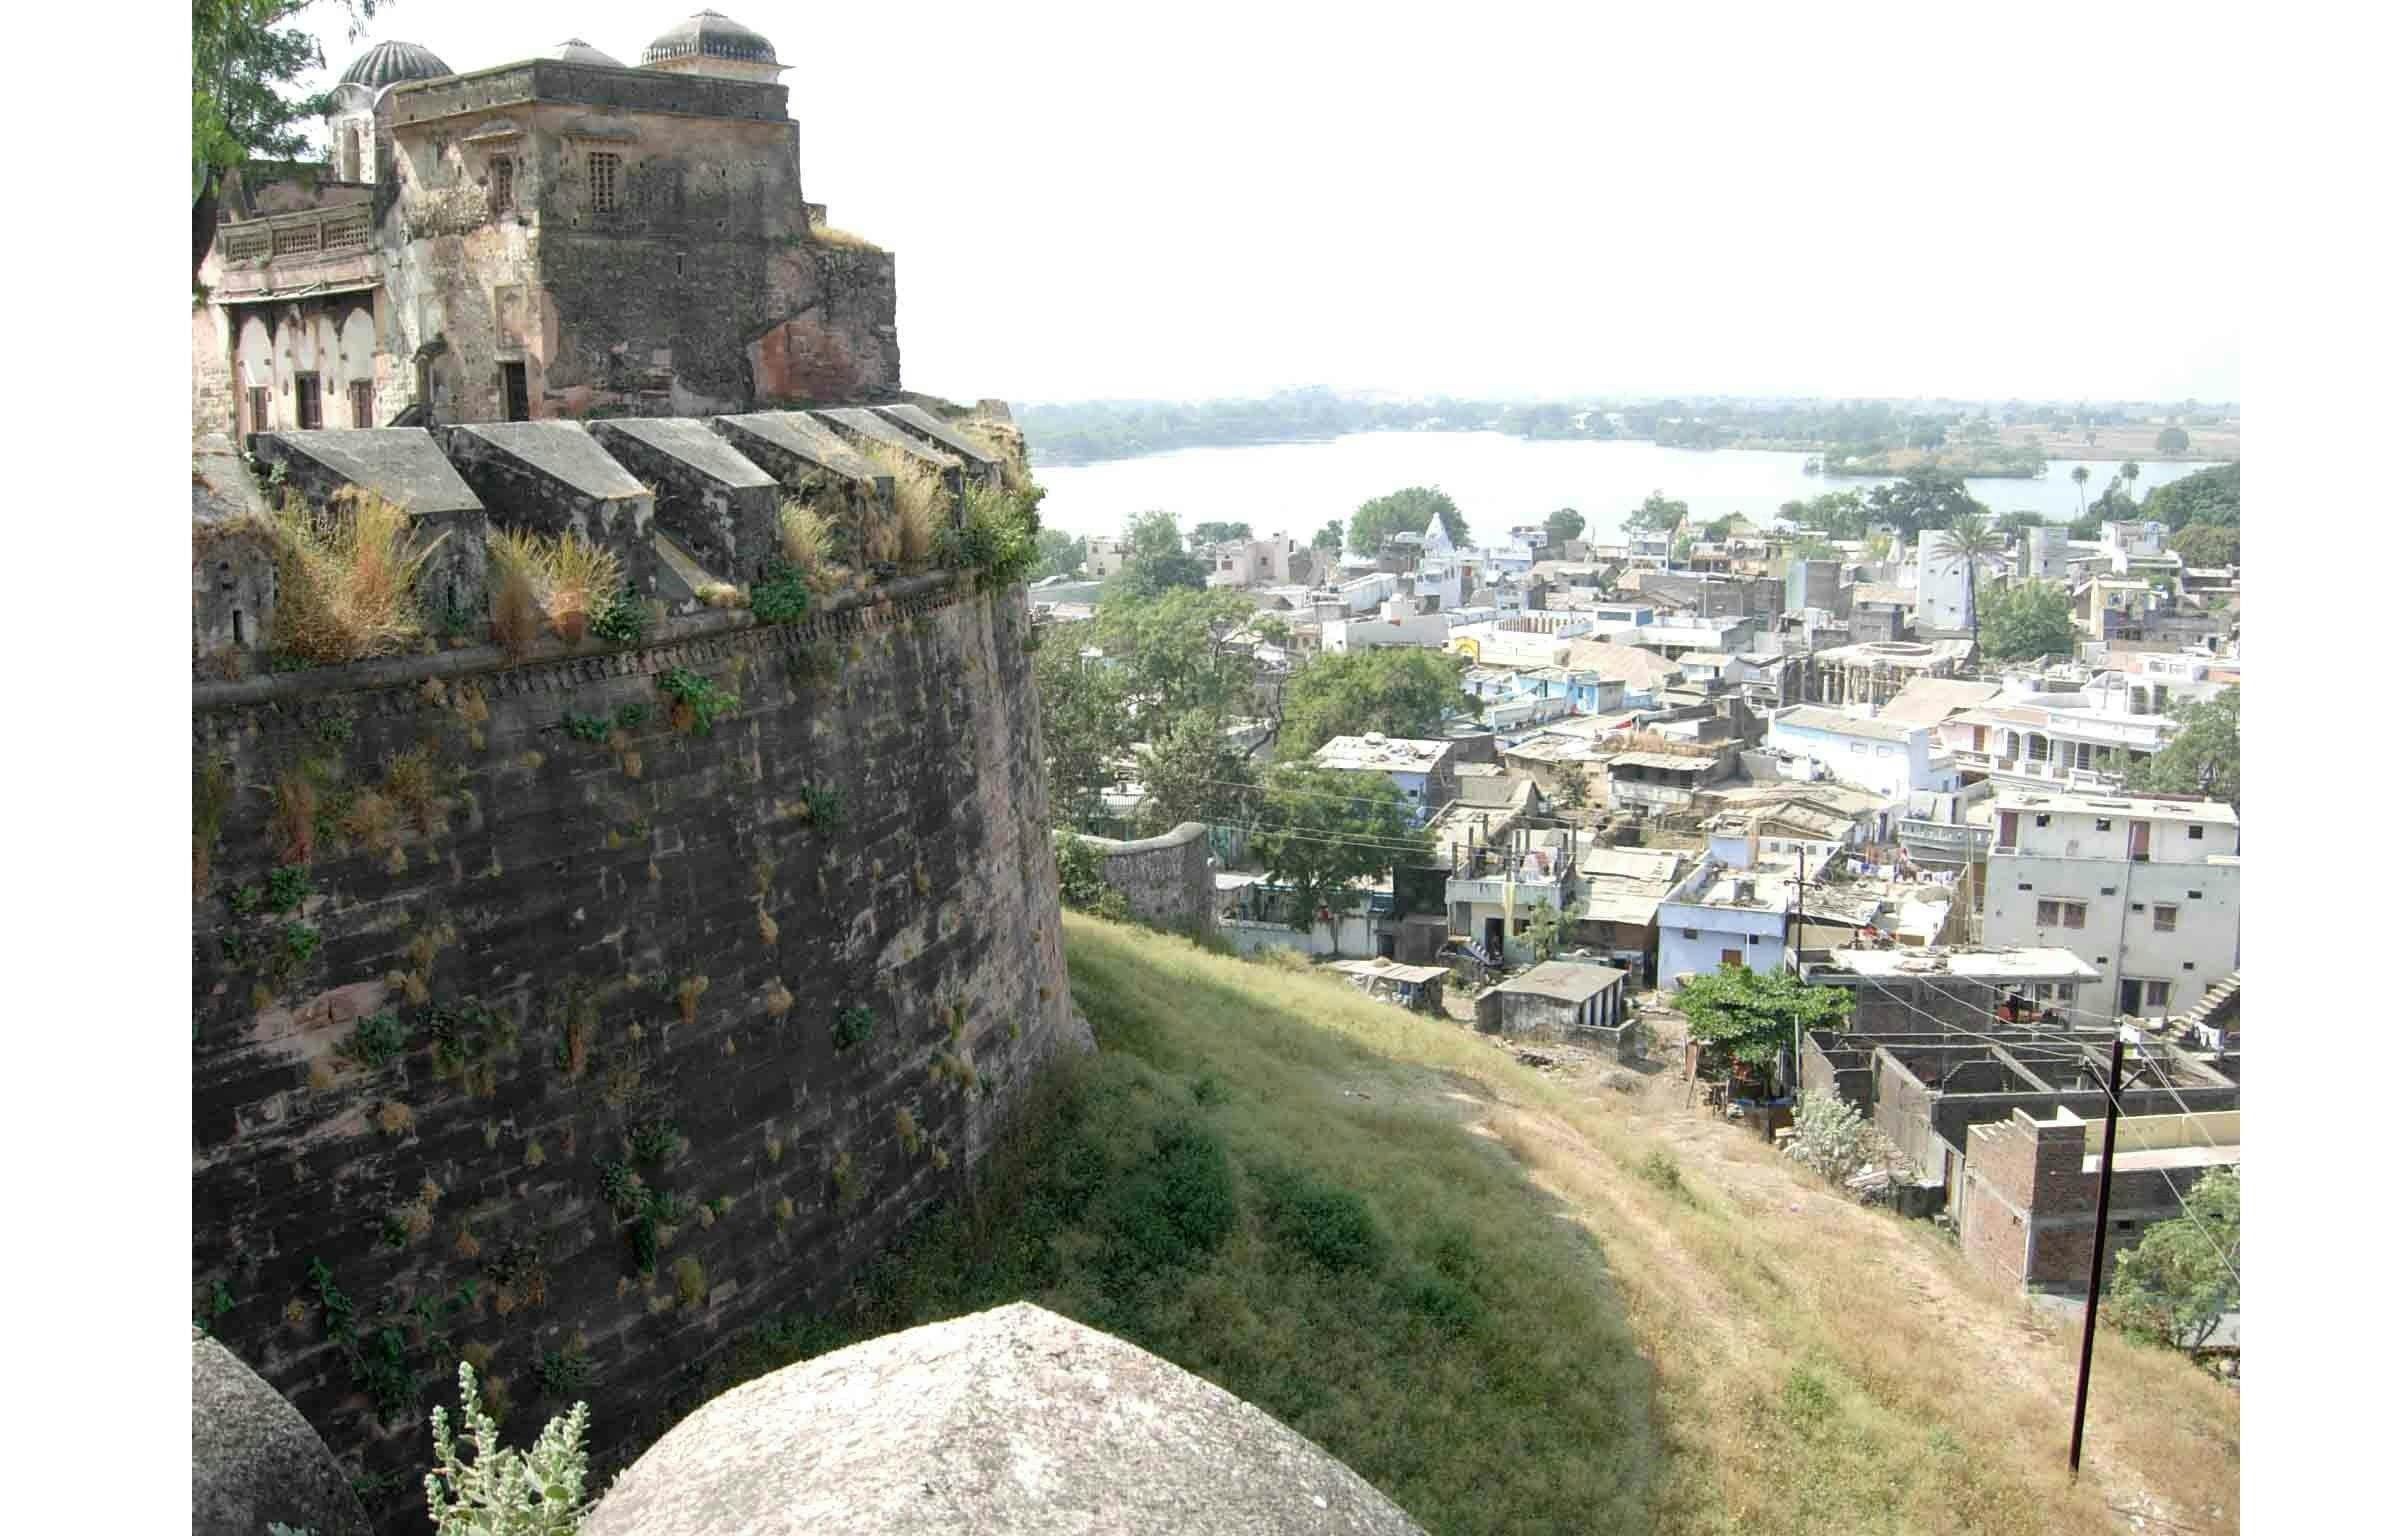 View of Dhar from its fort